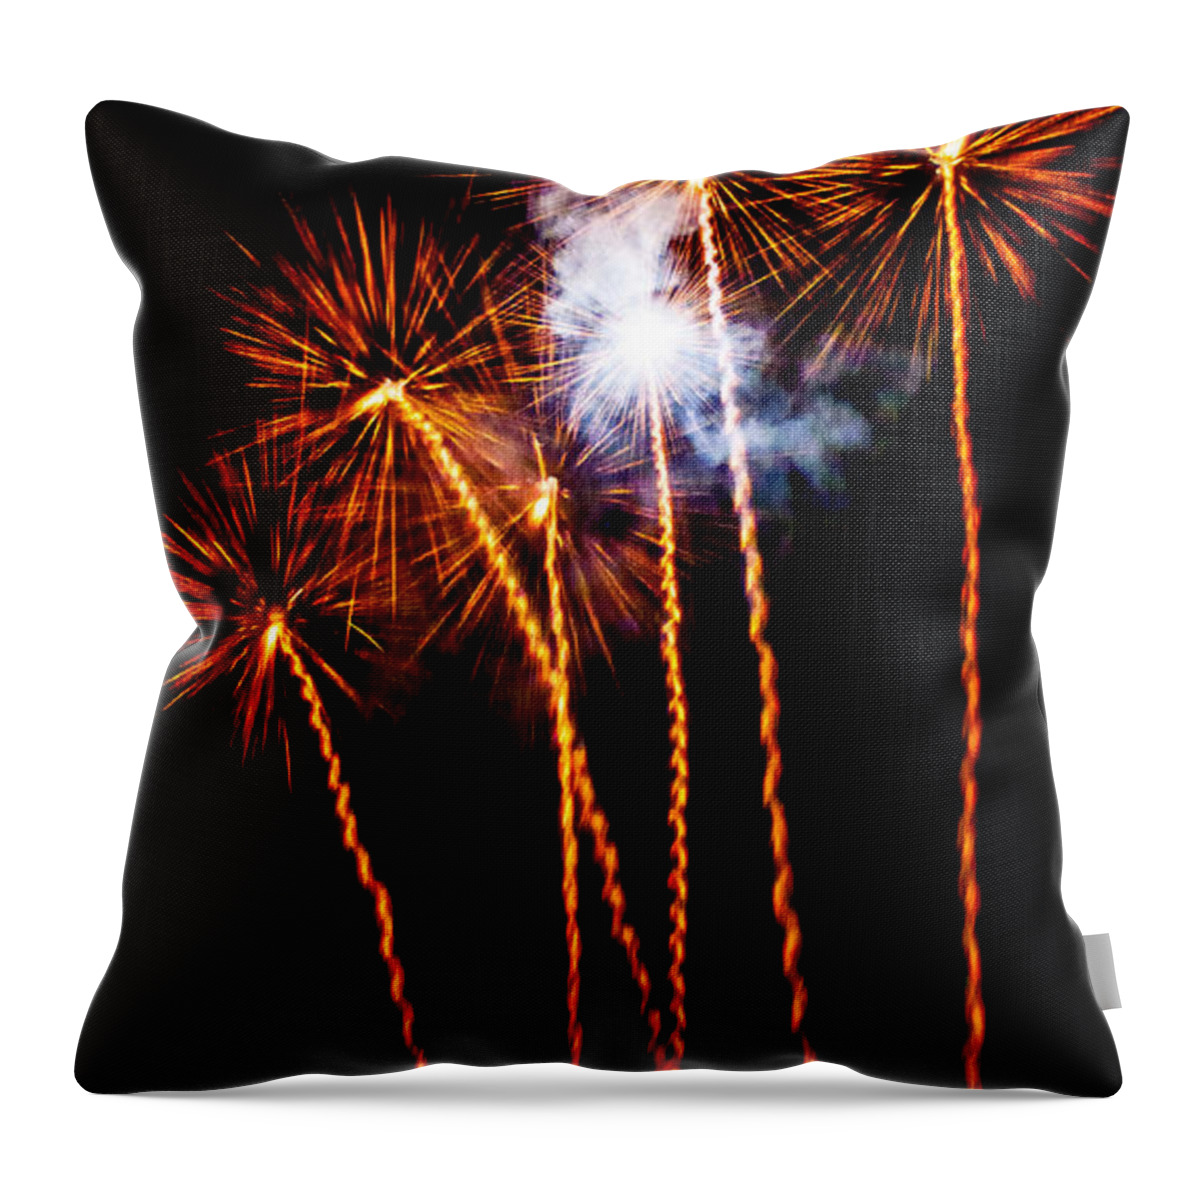 Fireworks Throw Pillow featuring the photograph Fire Dandelion Bouquet by Weston Westmoreland